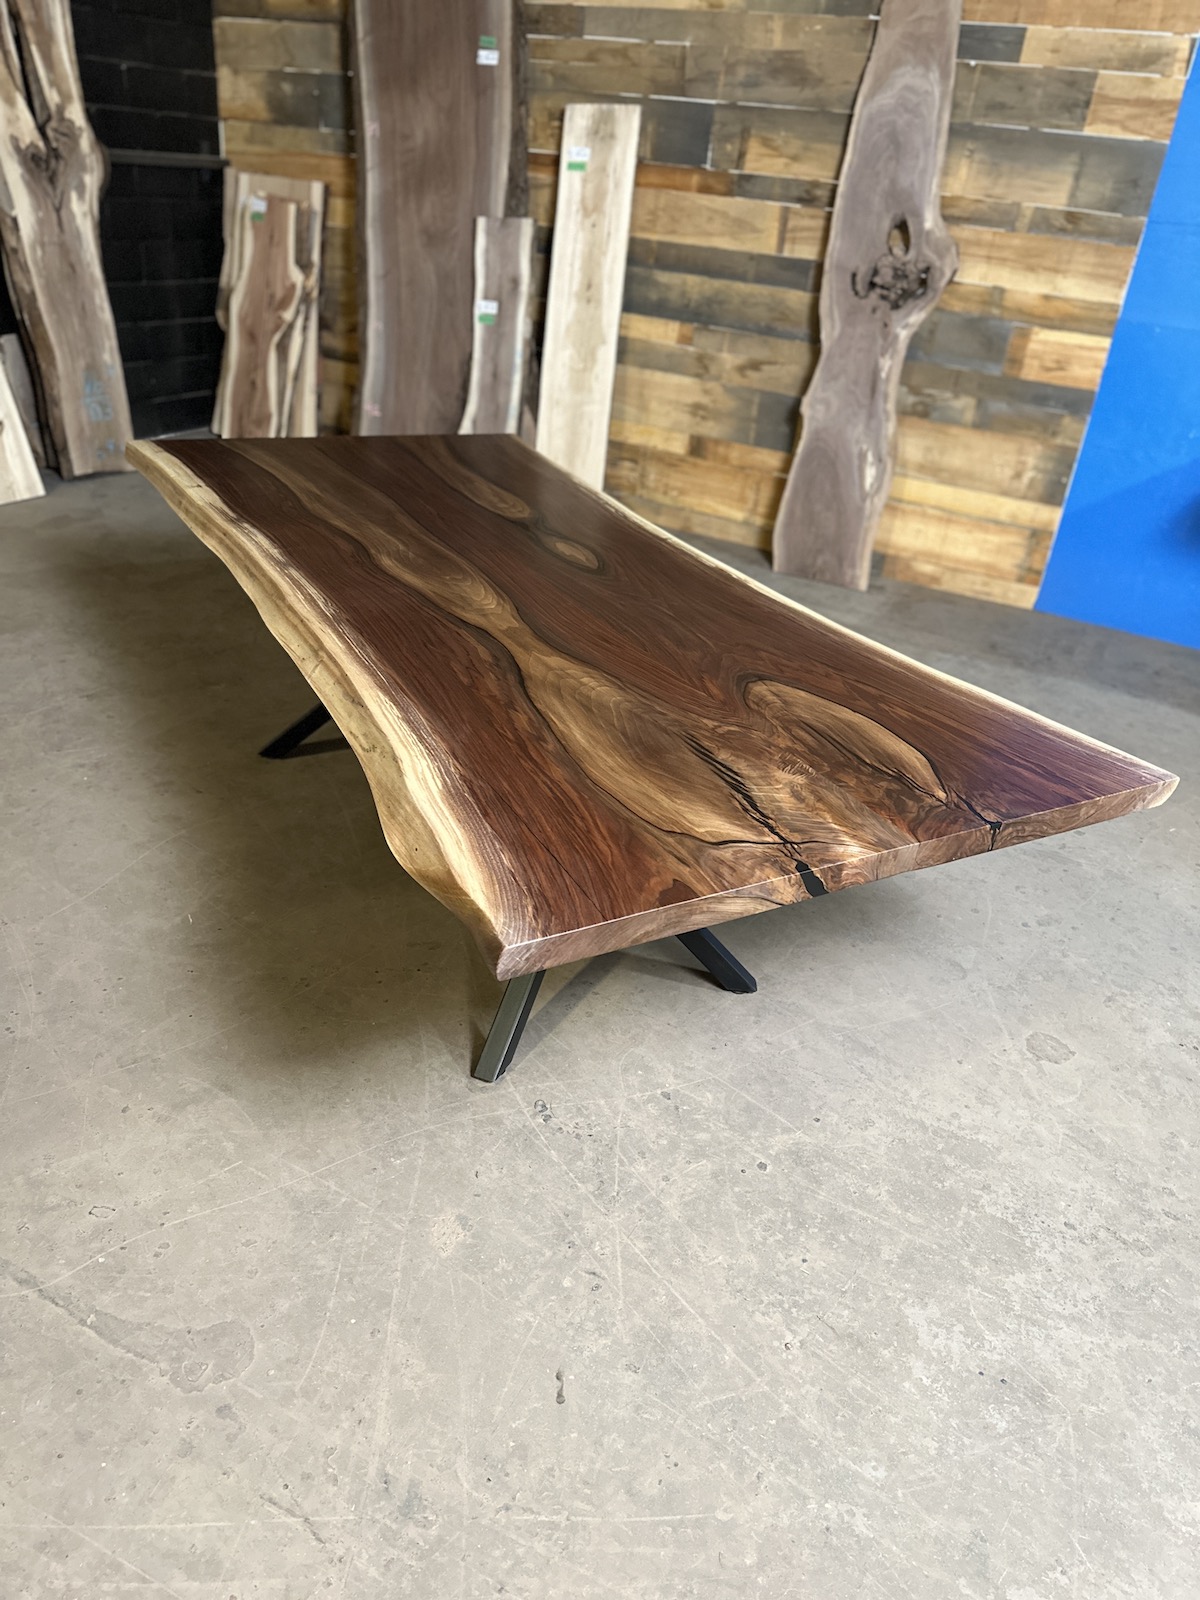 Live Edge Walnut Dining Table – Book Match Glue Up | Anglewood